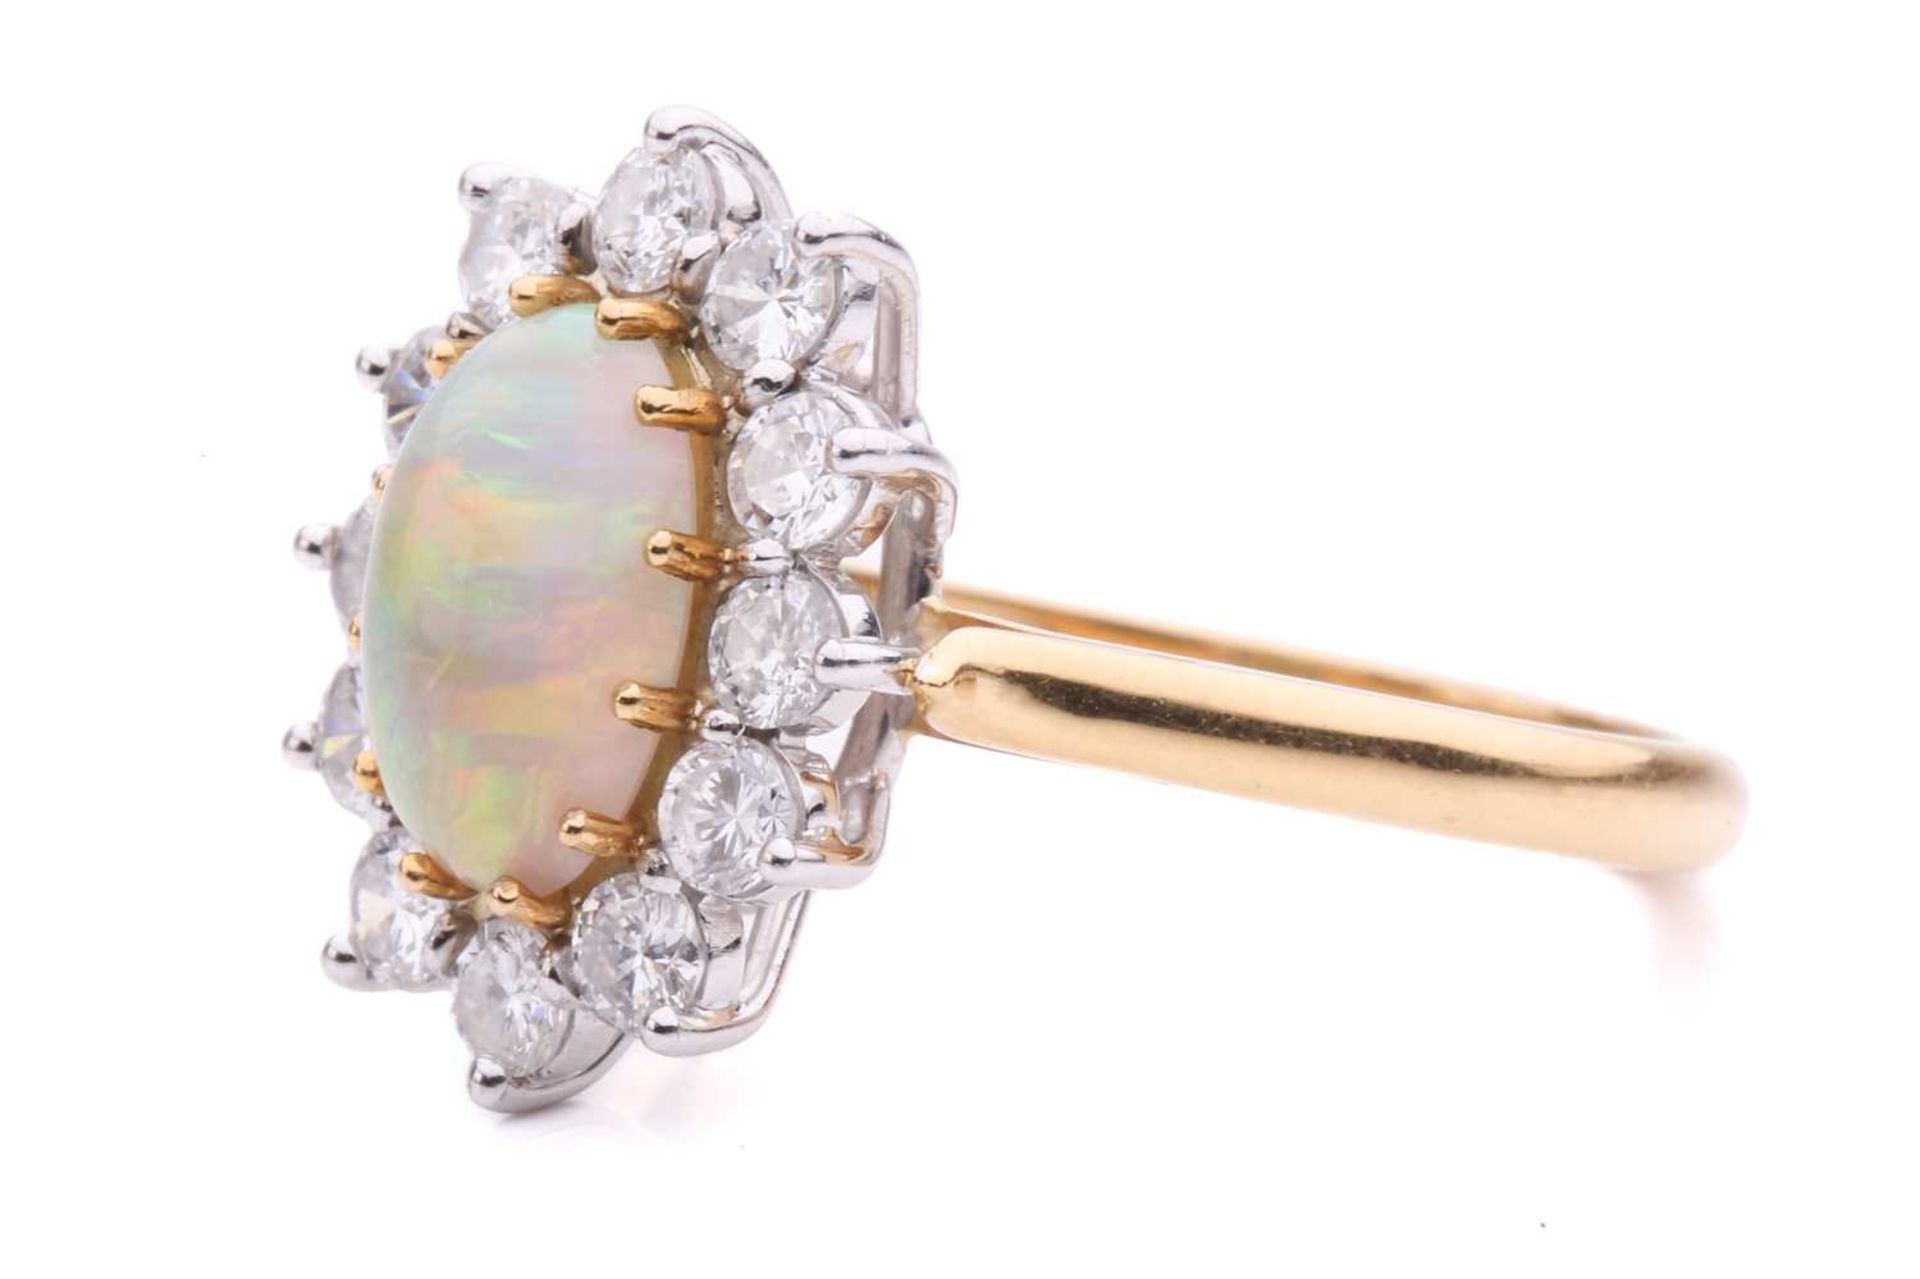 An opal and diamond entourage ring in 18ct gold, featuring an oval precious opal cabochon of 9.2 x - Image 5 of 5